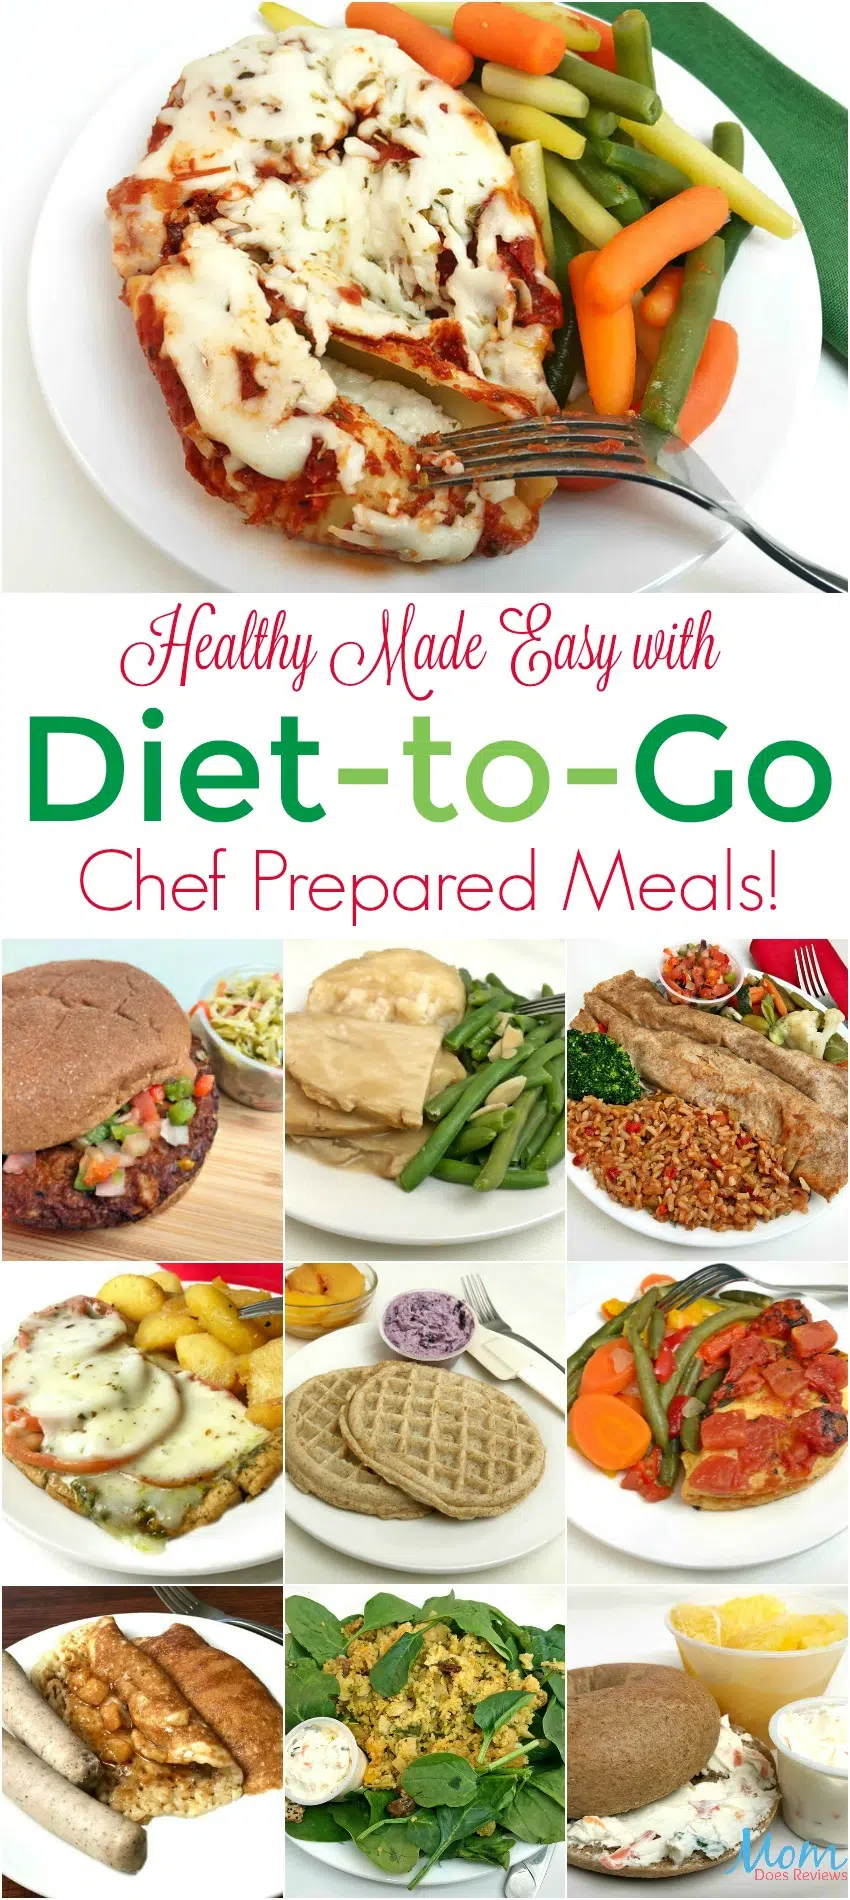 Healthy Made Easy with Diet-to-Go Chef Prepared Meals!